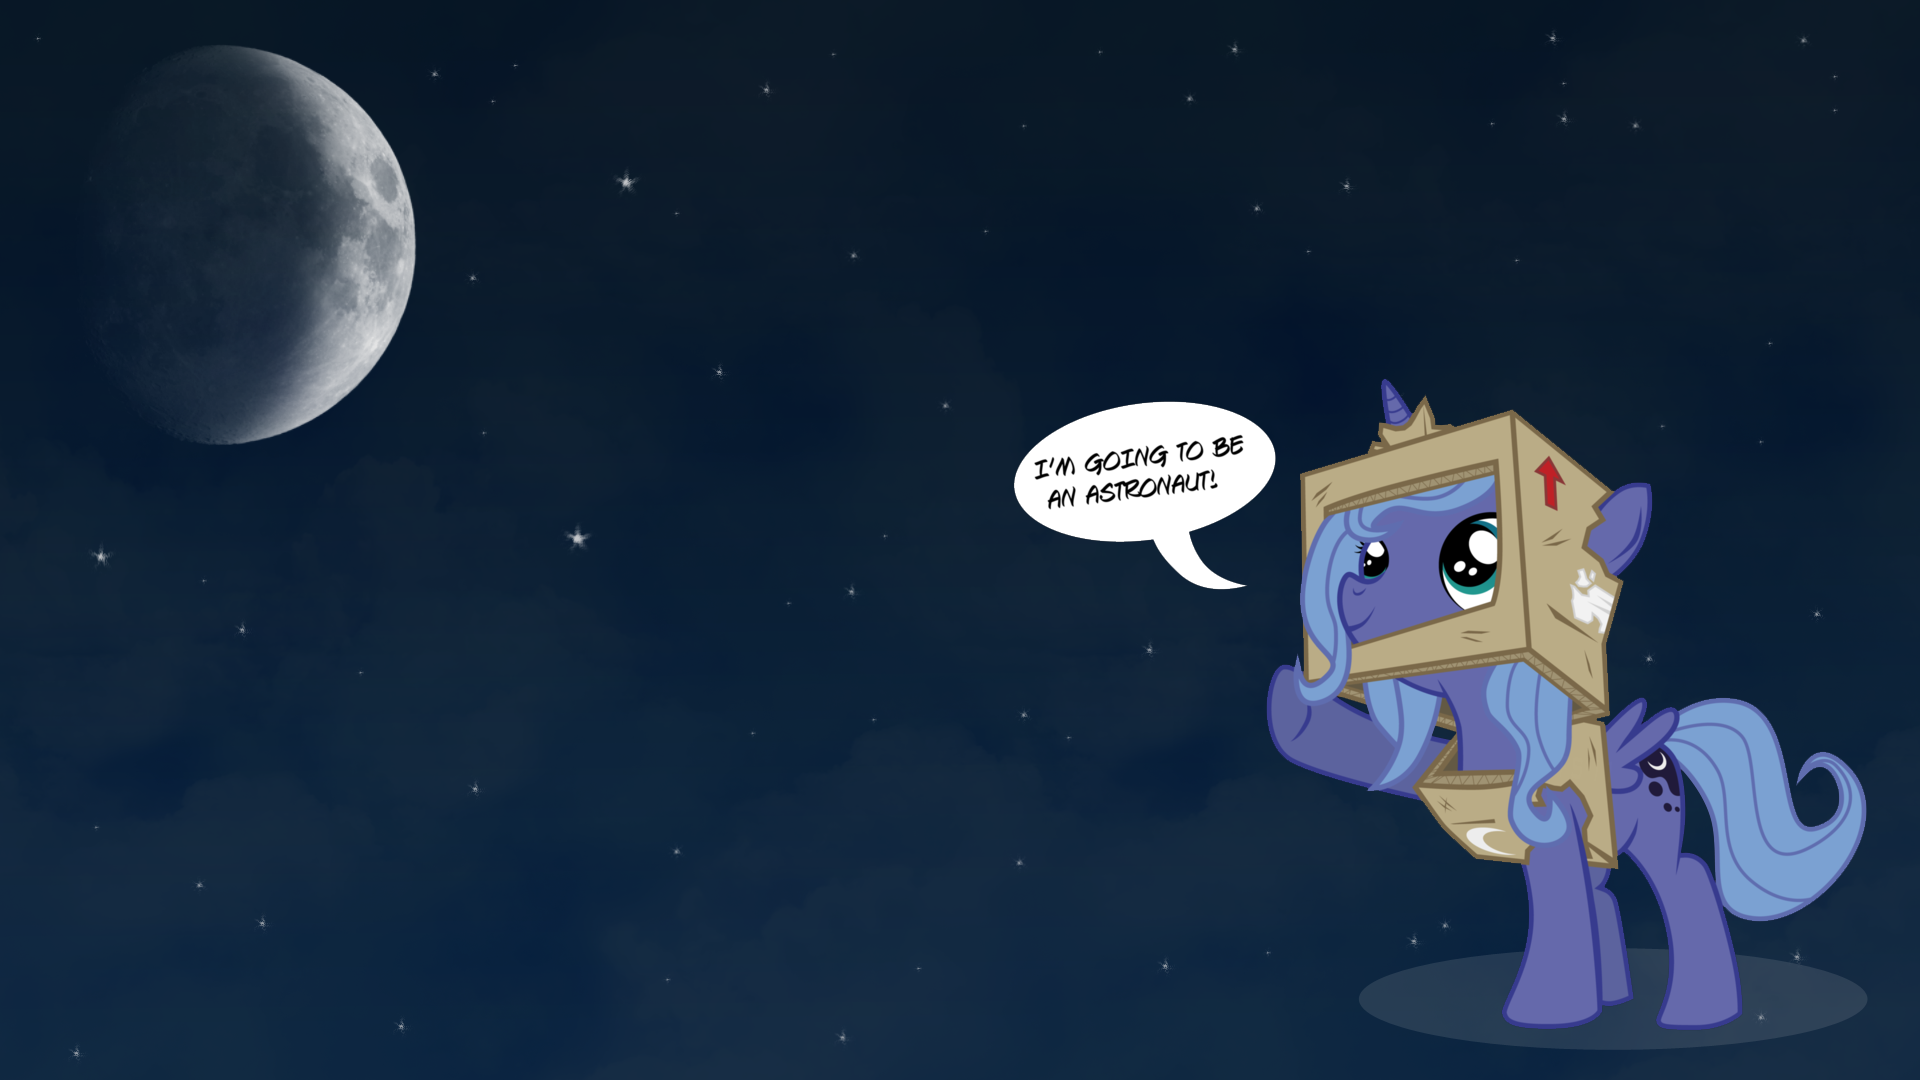 Luna Wants to be an Astronaut by fongsaunder and MyLittleLuckyWish